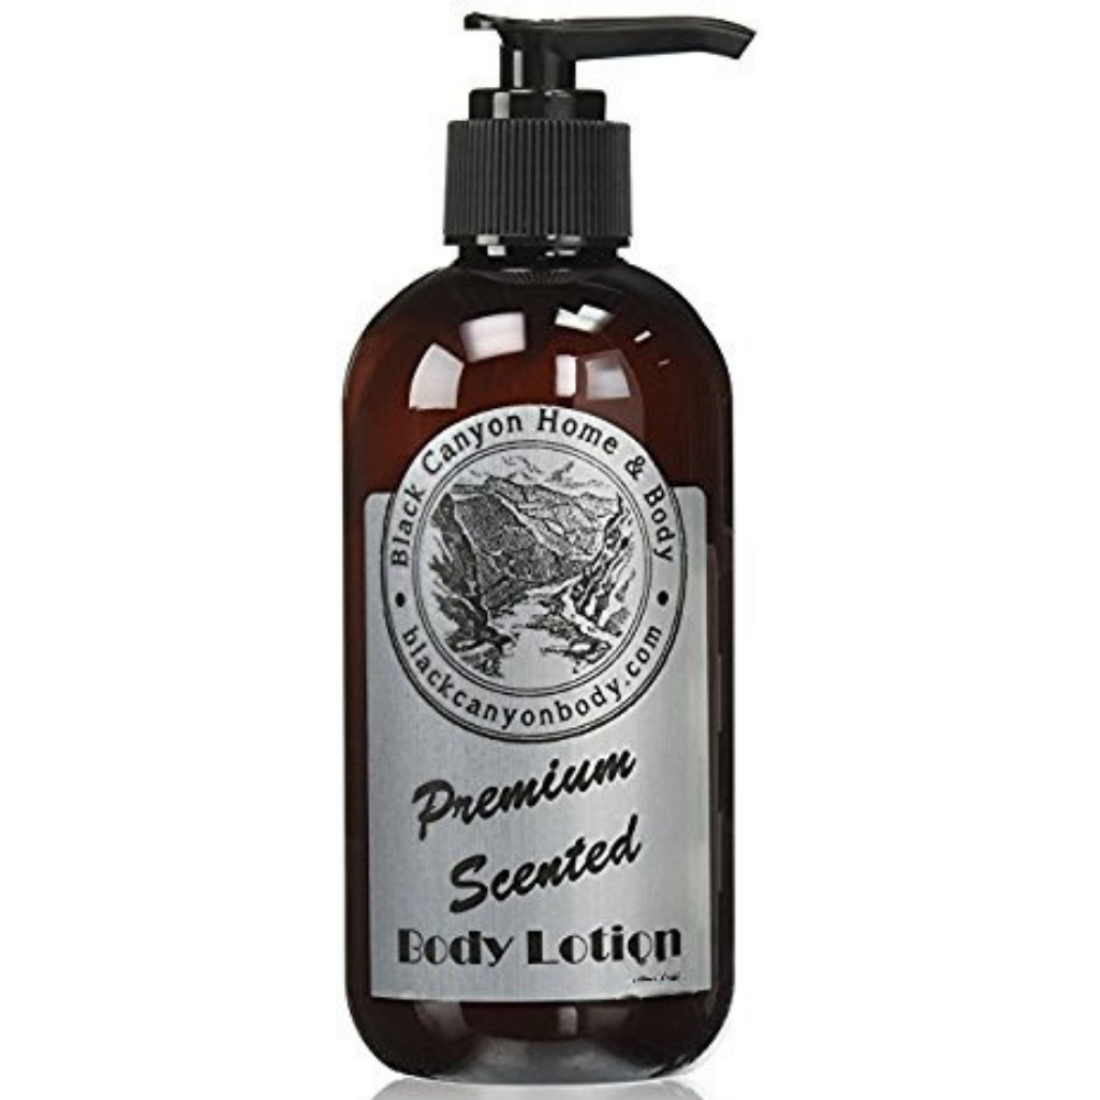 Black Canyon Wild Blueberry Vanilla Scented Luxury Body Lotion with Lanolin and Jojoba Oil